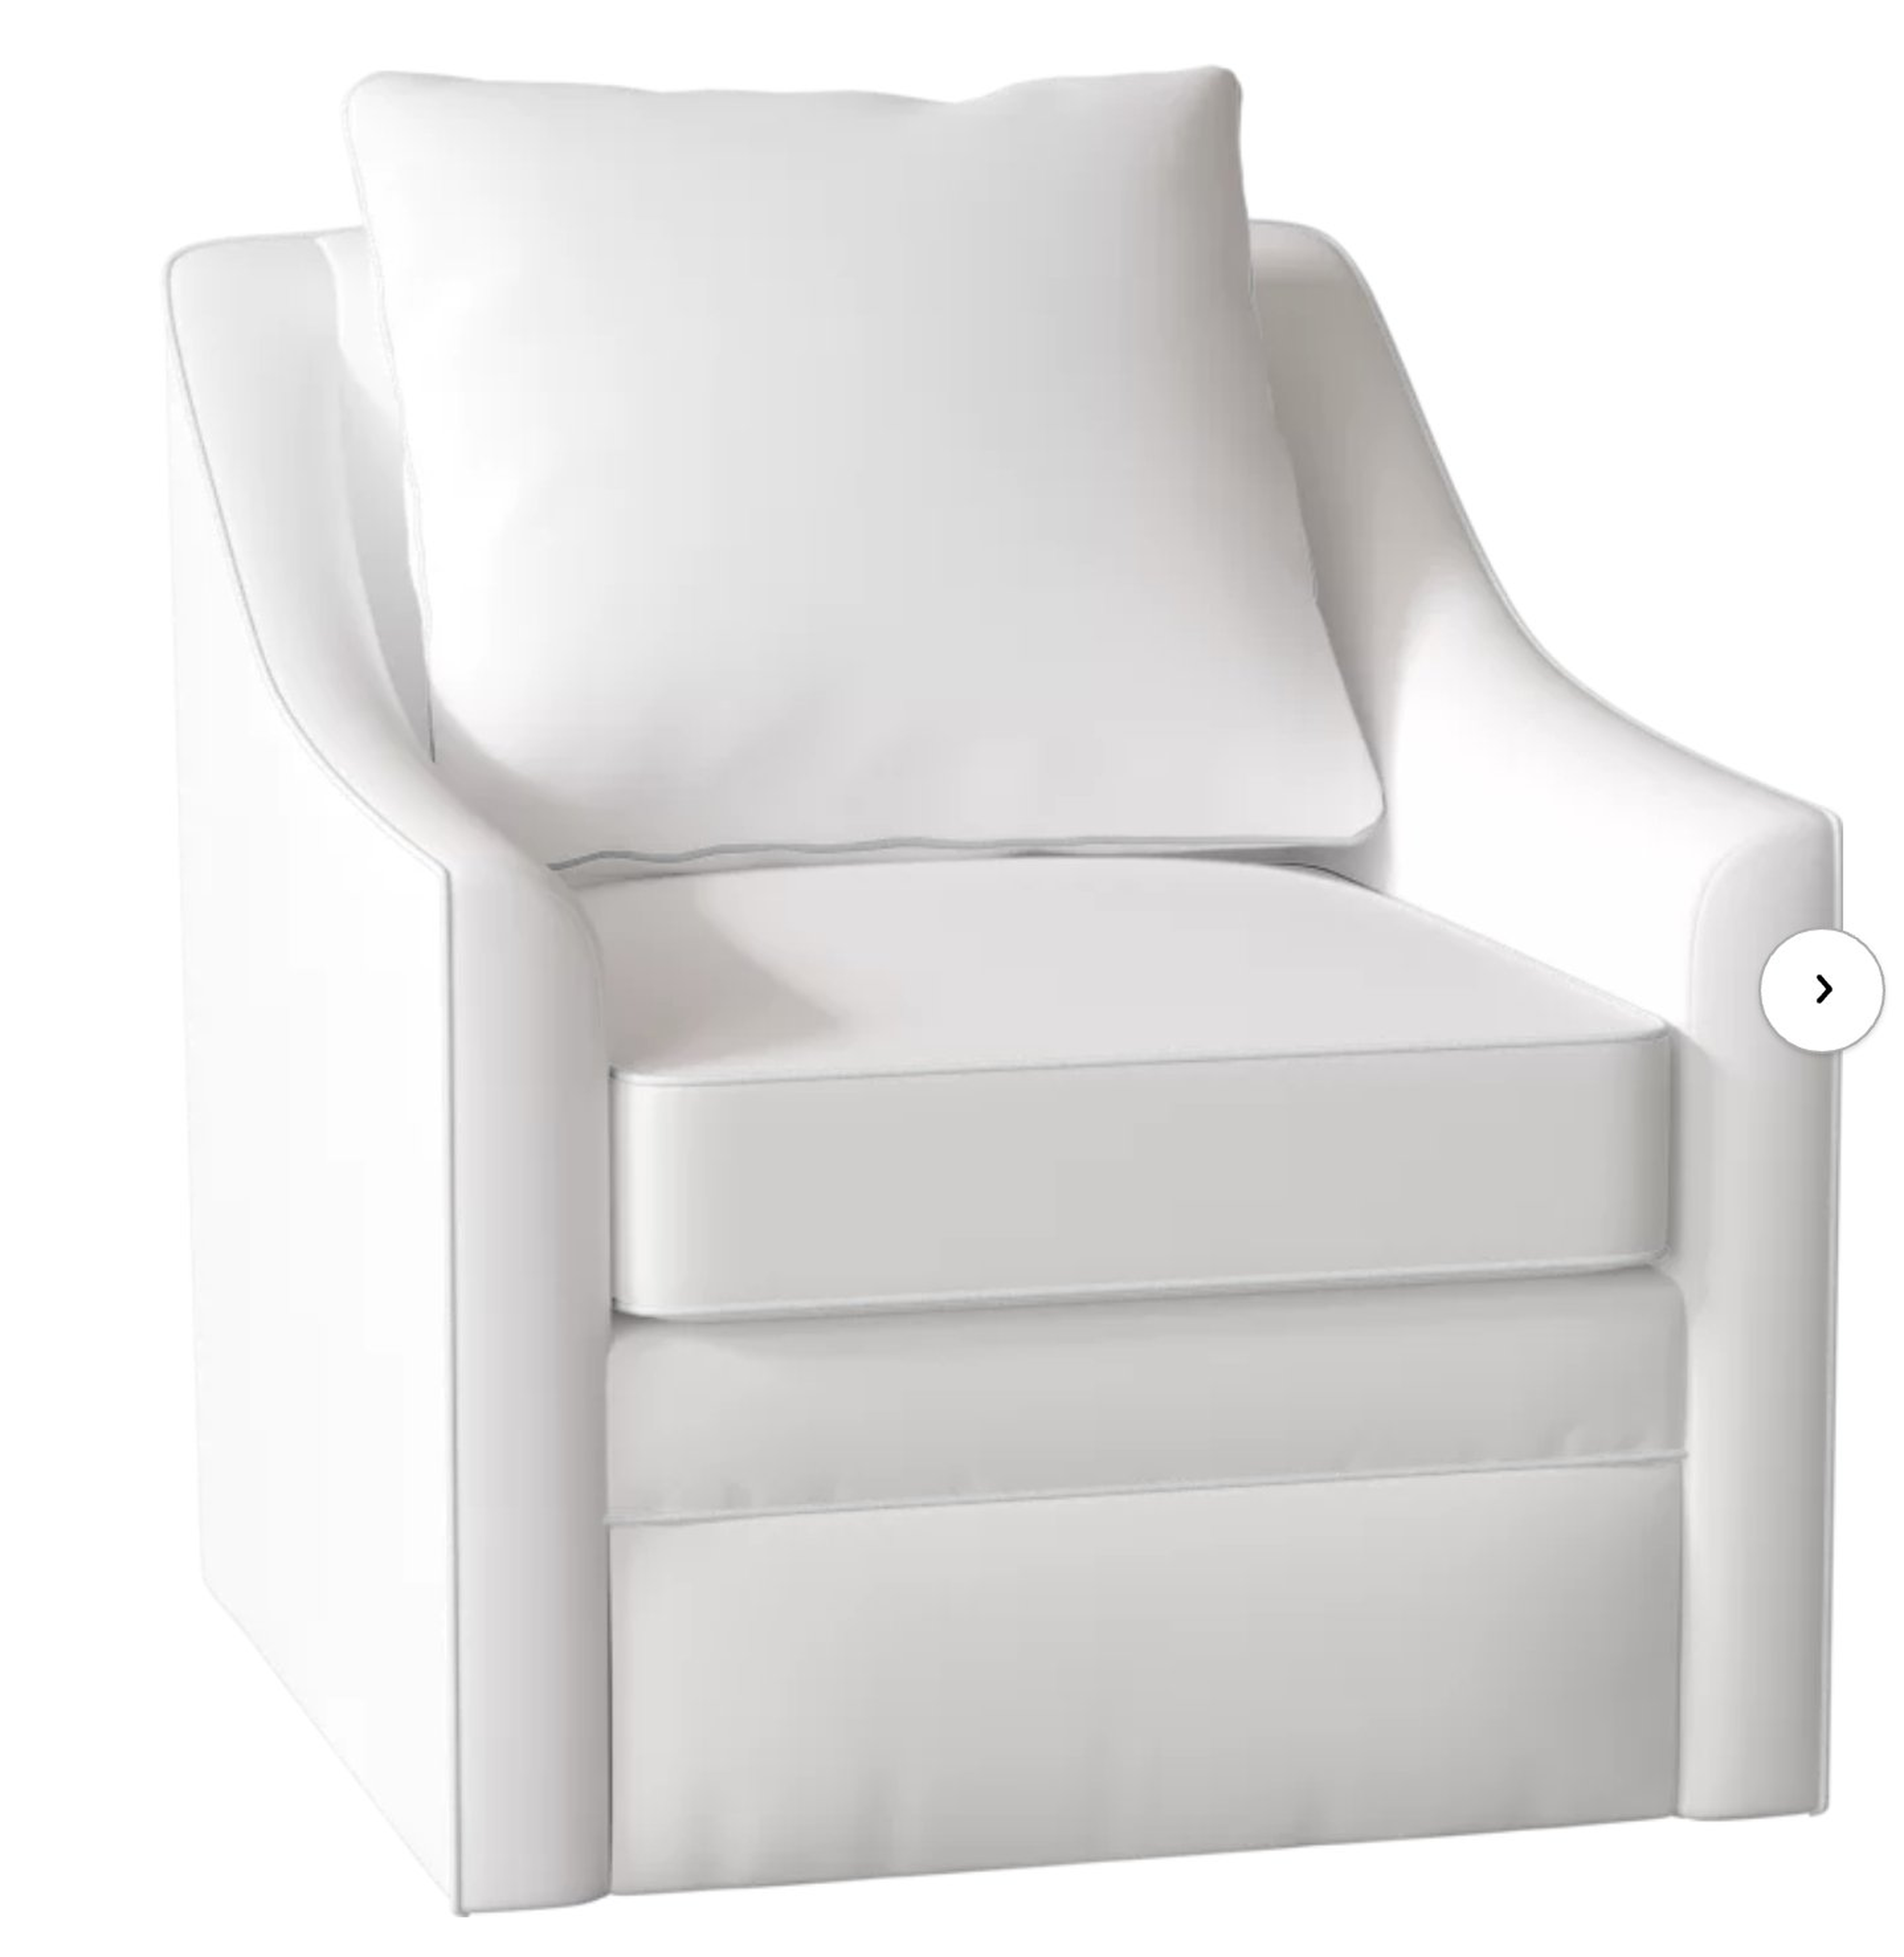 Quincy Swivel Armchair- spinsol optic white - Wayfair